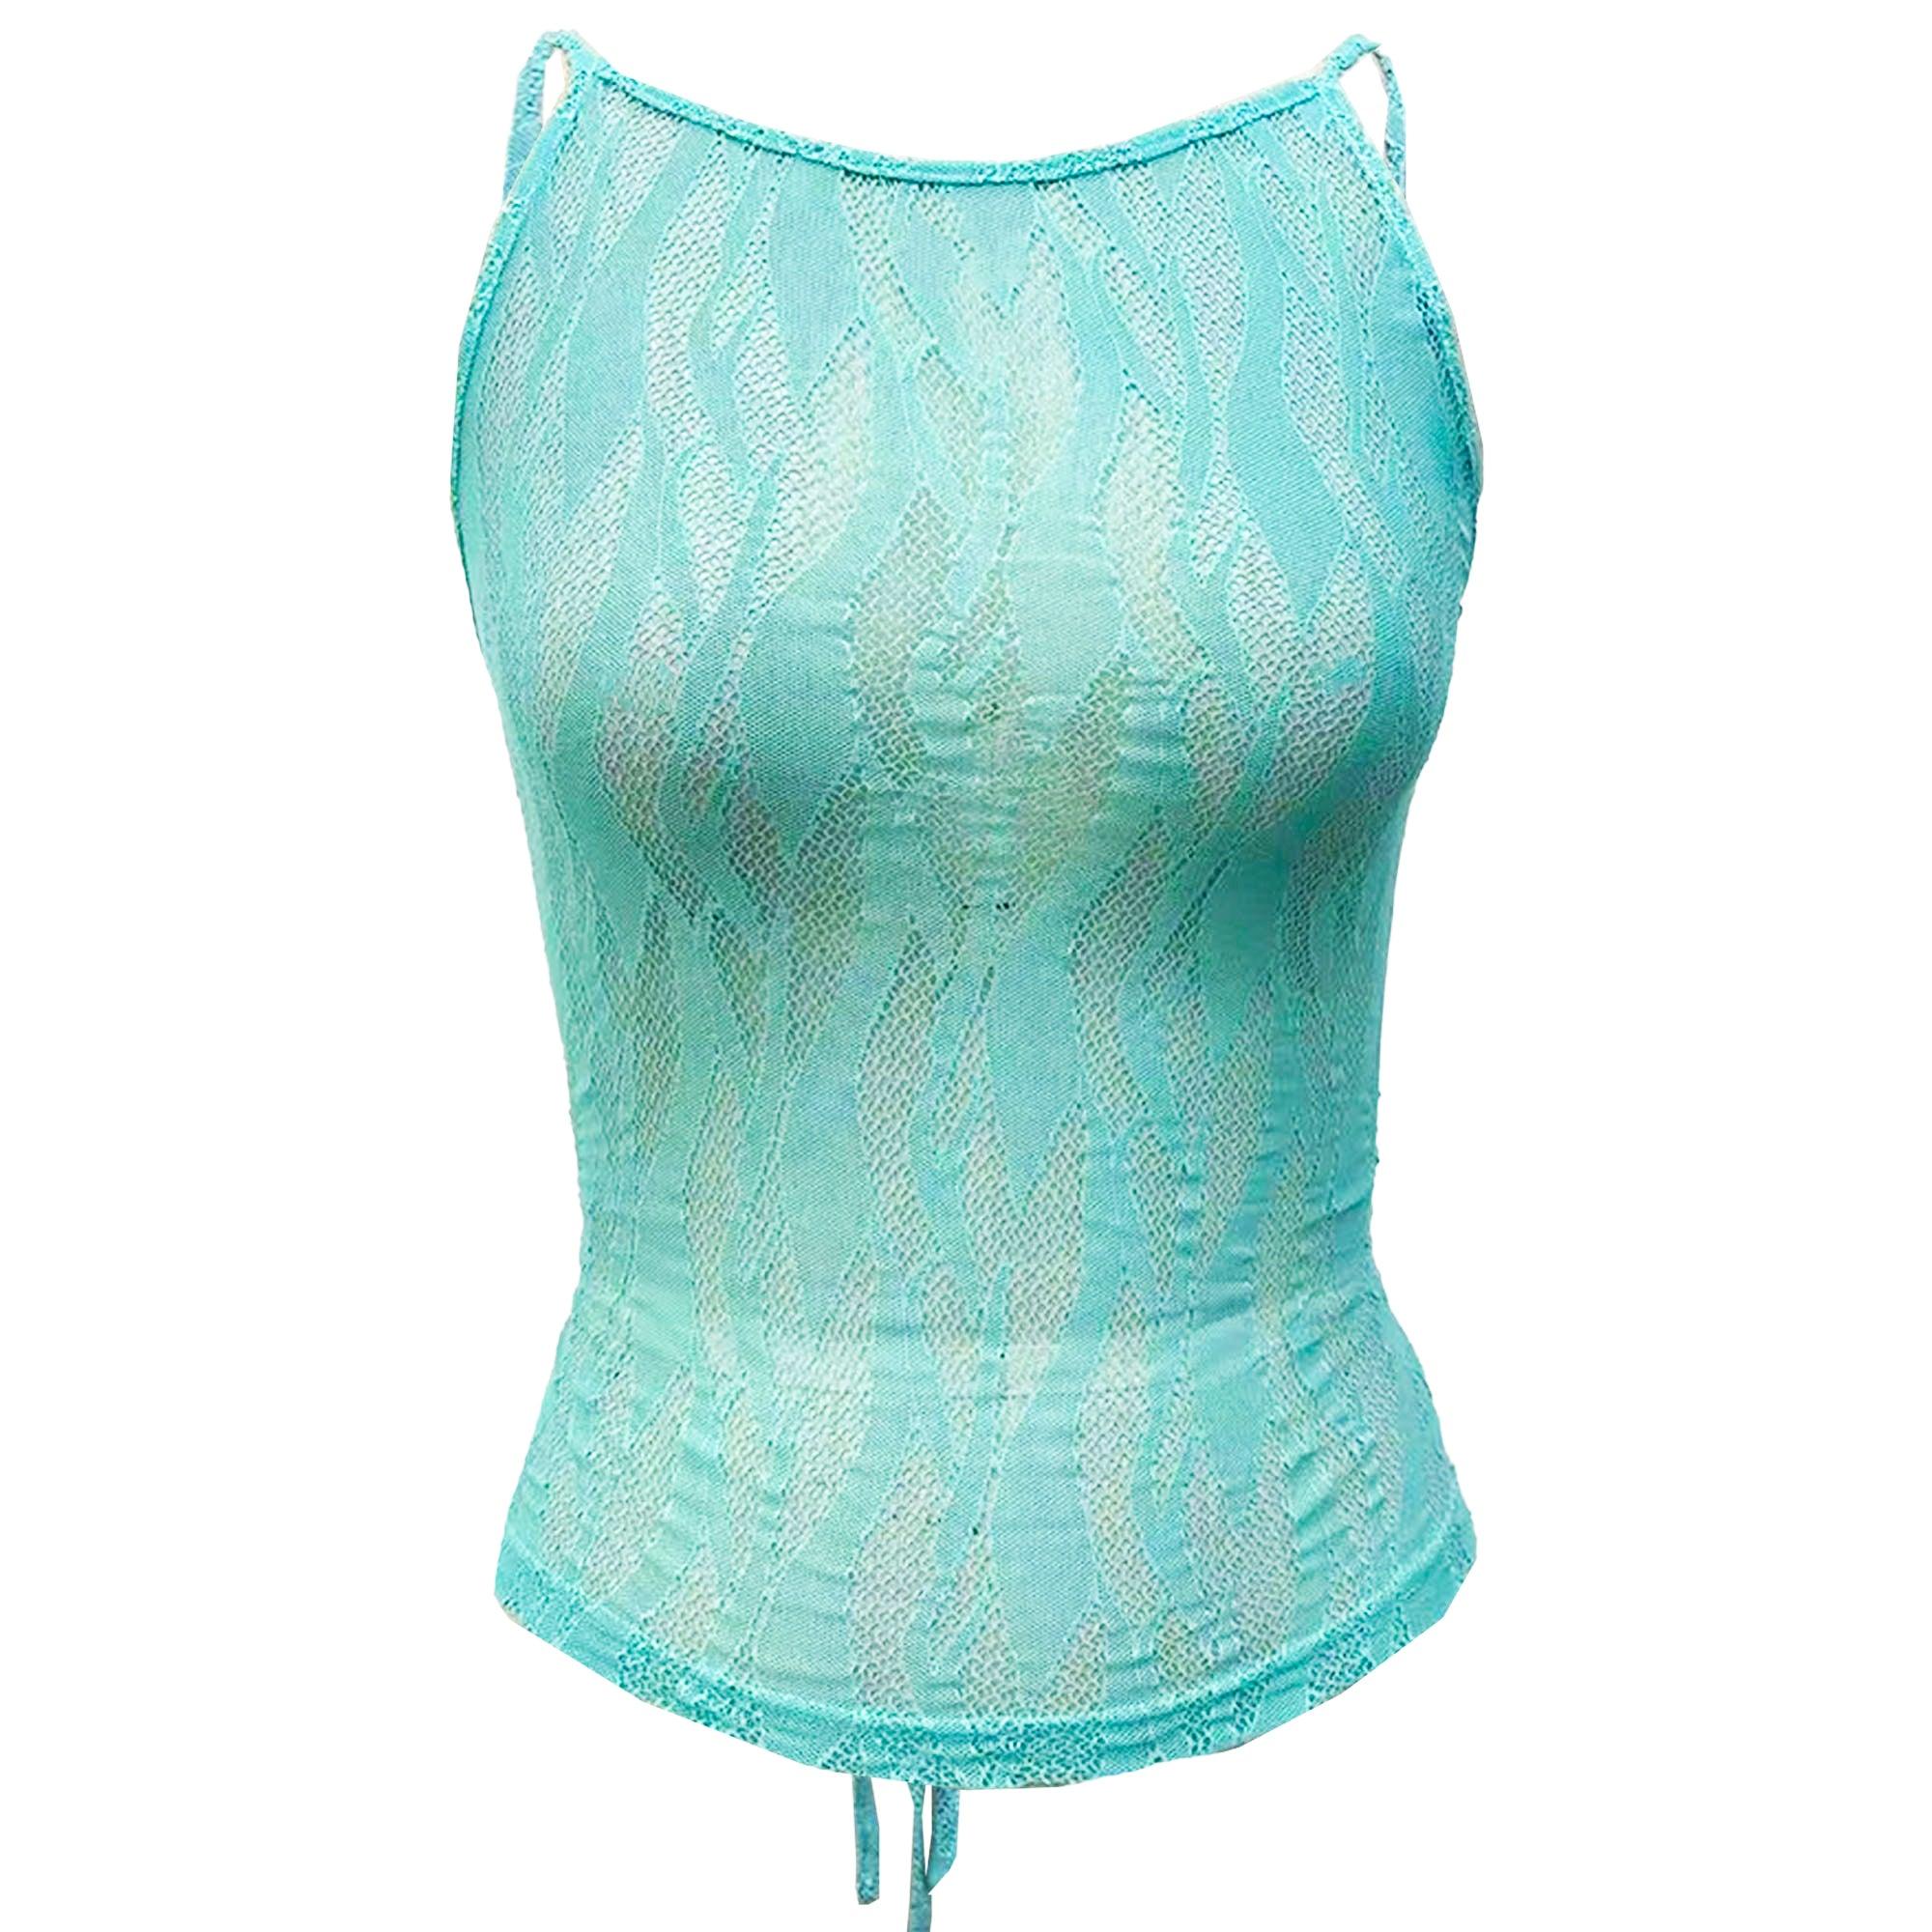 The Capri Lace Top - Elsie & Fred